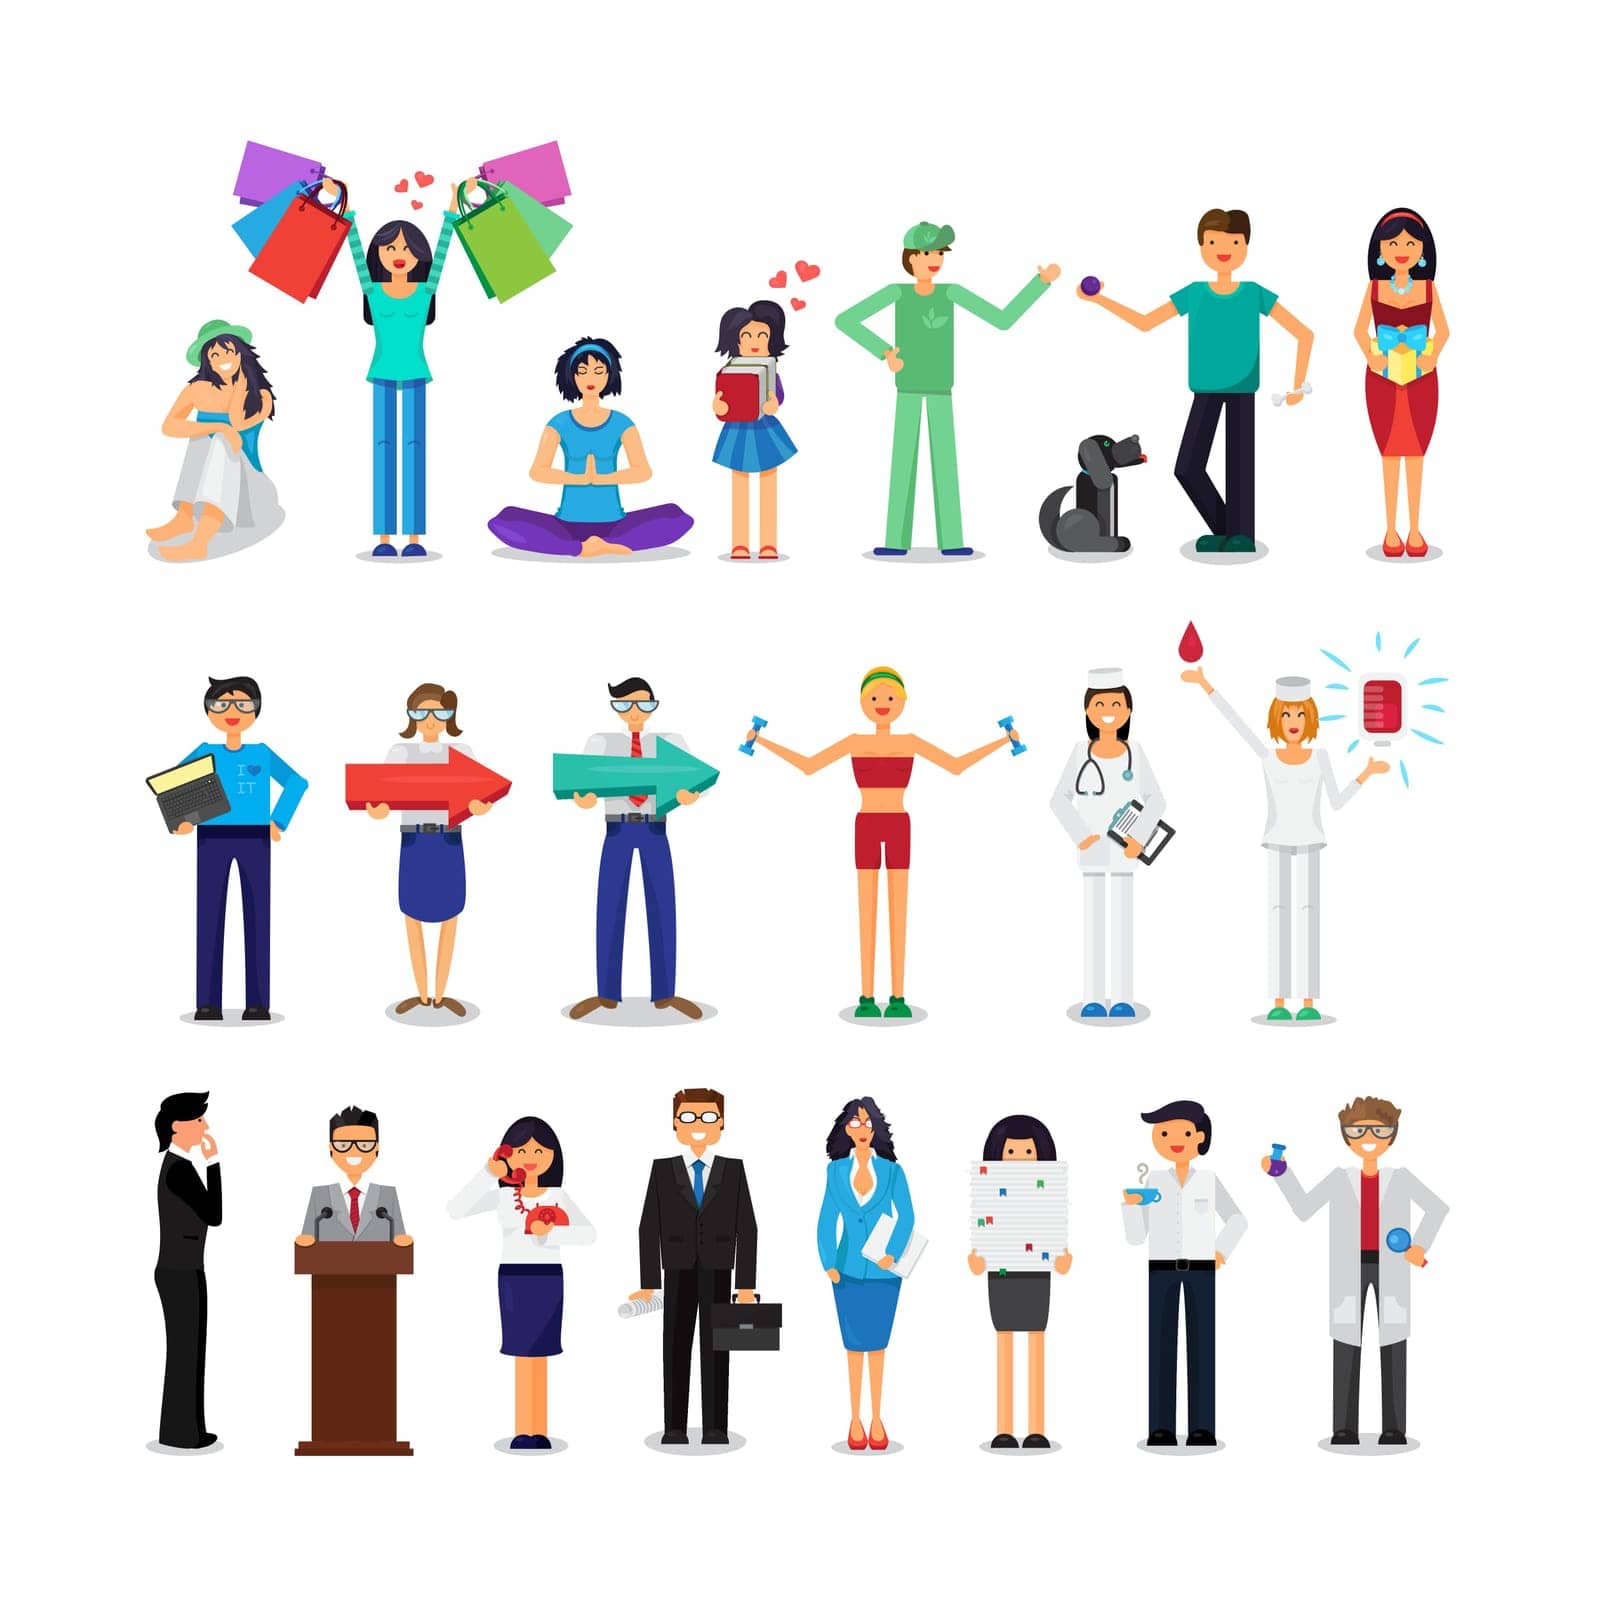 People of different occupations set. Illustrations of various spheres of life. Vector